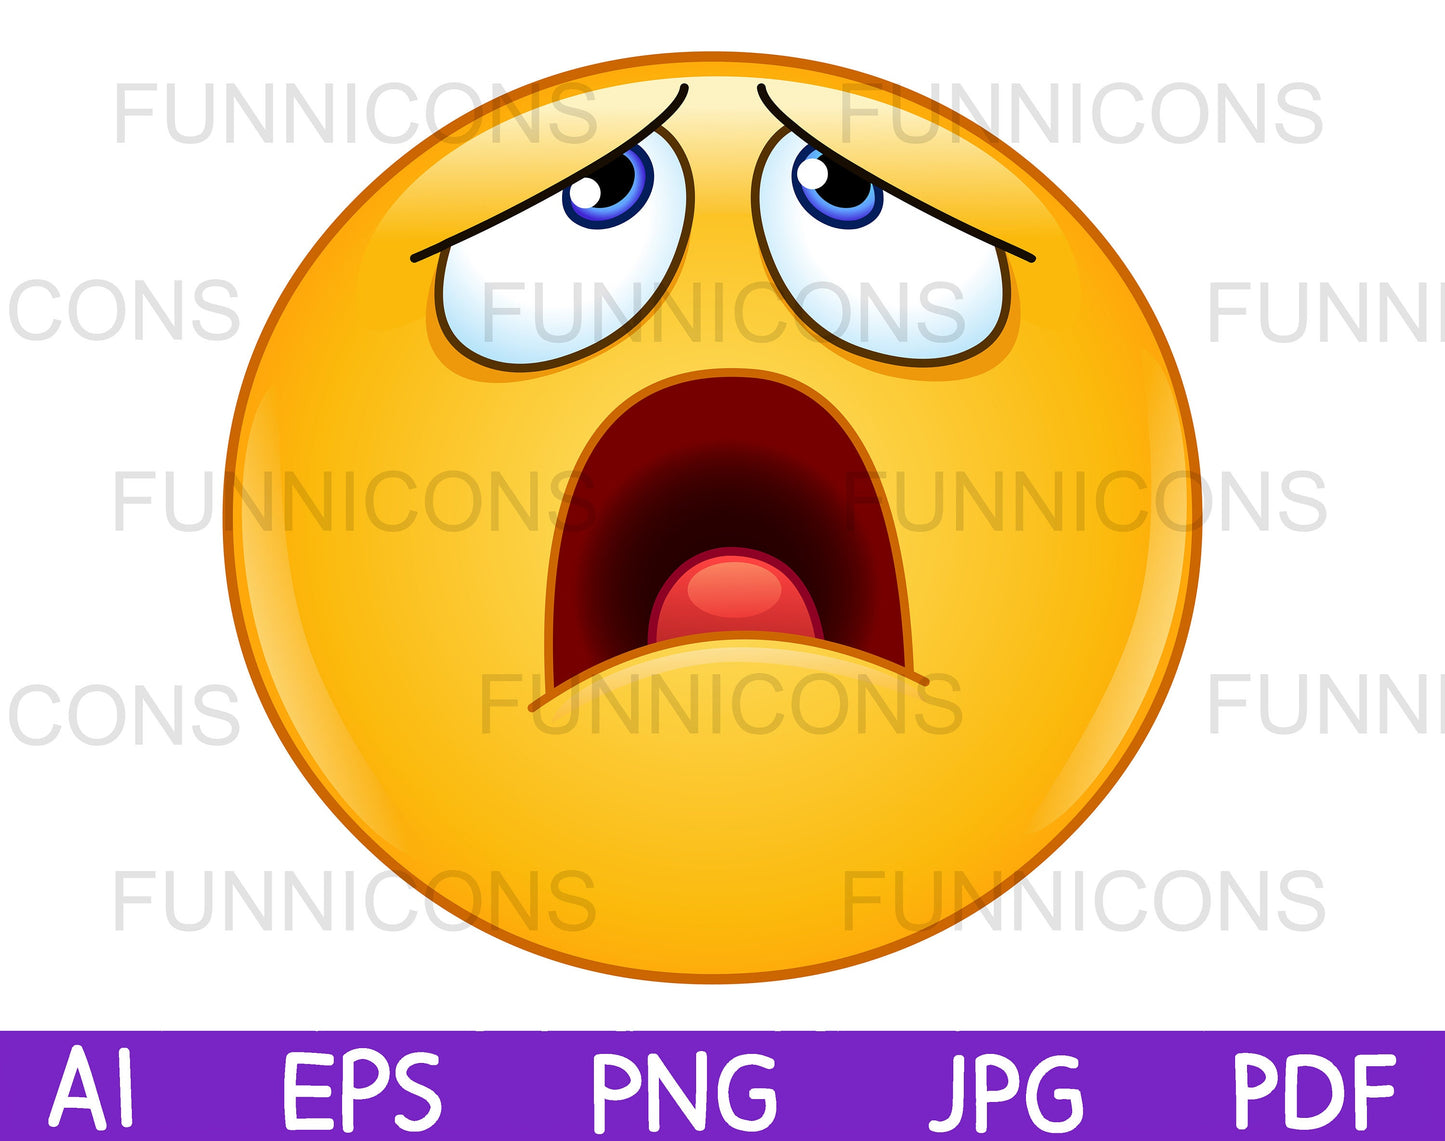 Exasperated Emoji Looking up with Open Mouth Having a Tired Expression of Oh No, What Now